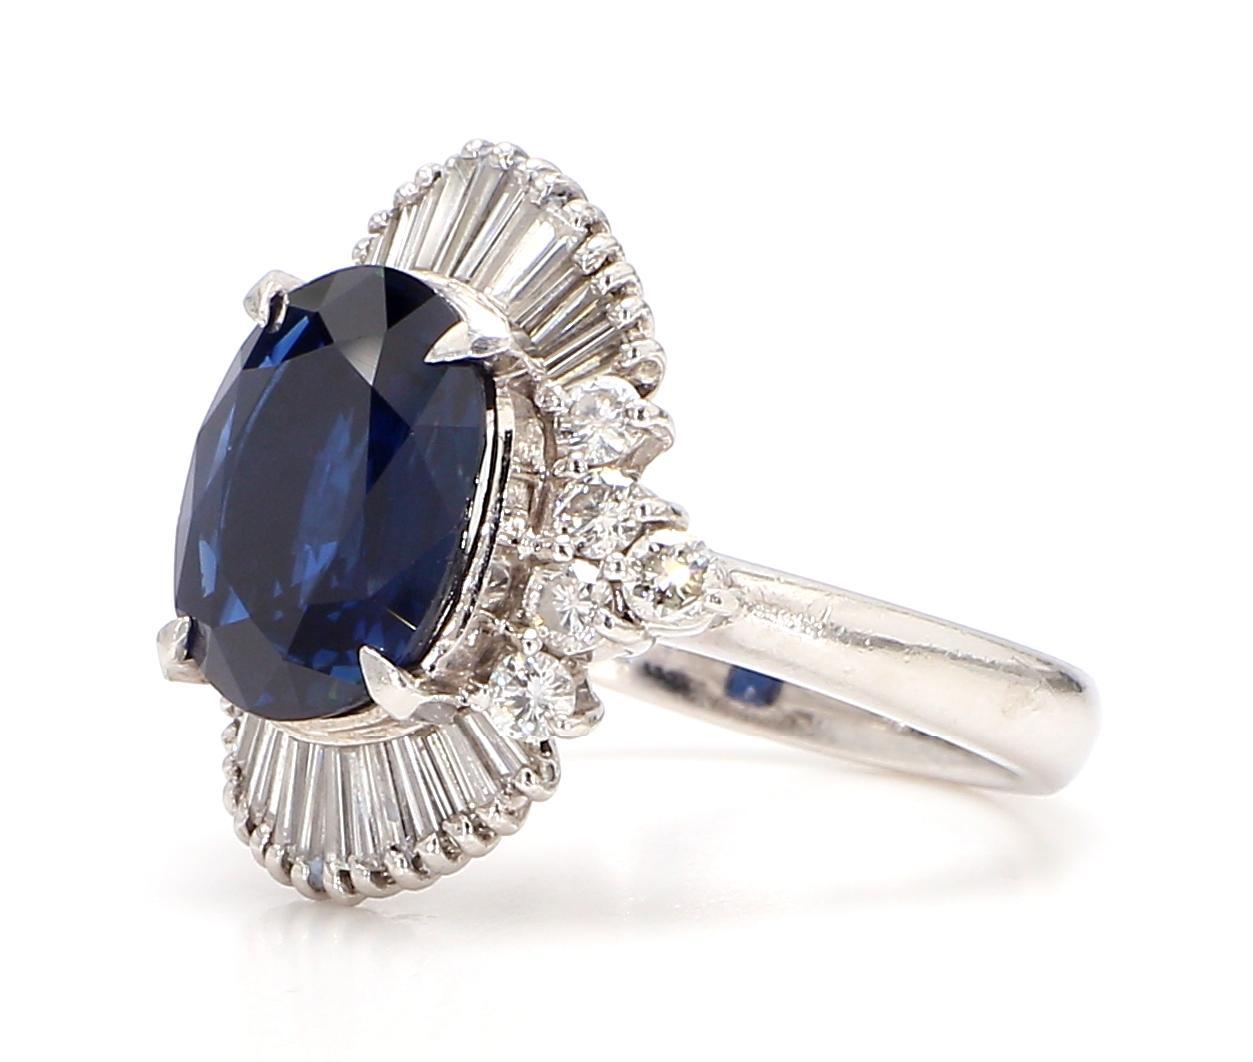 This exquisite Diamond and Blue Sapphire Ring is a stunning piece of jewelry that combines elegance, beauty, and sophistication. Crafted with meticulous attention to detail, this ring is truly a work of art.

The centerpiece of this ring is a 4.2